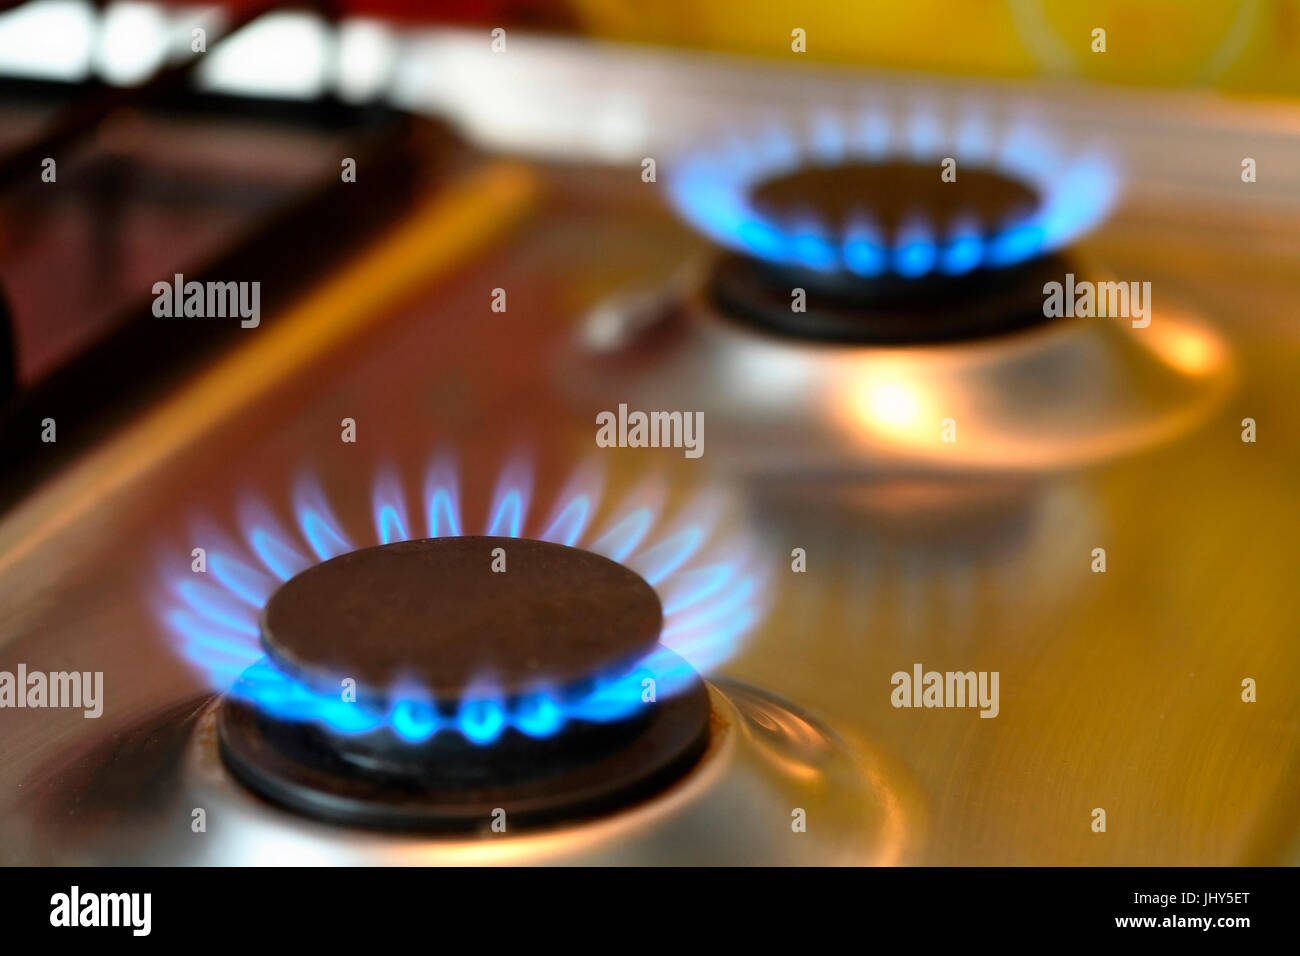 Gas flame, Gasflamme Stock Photo